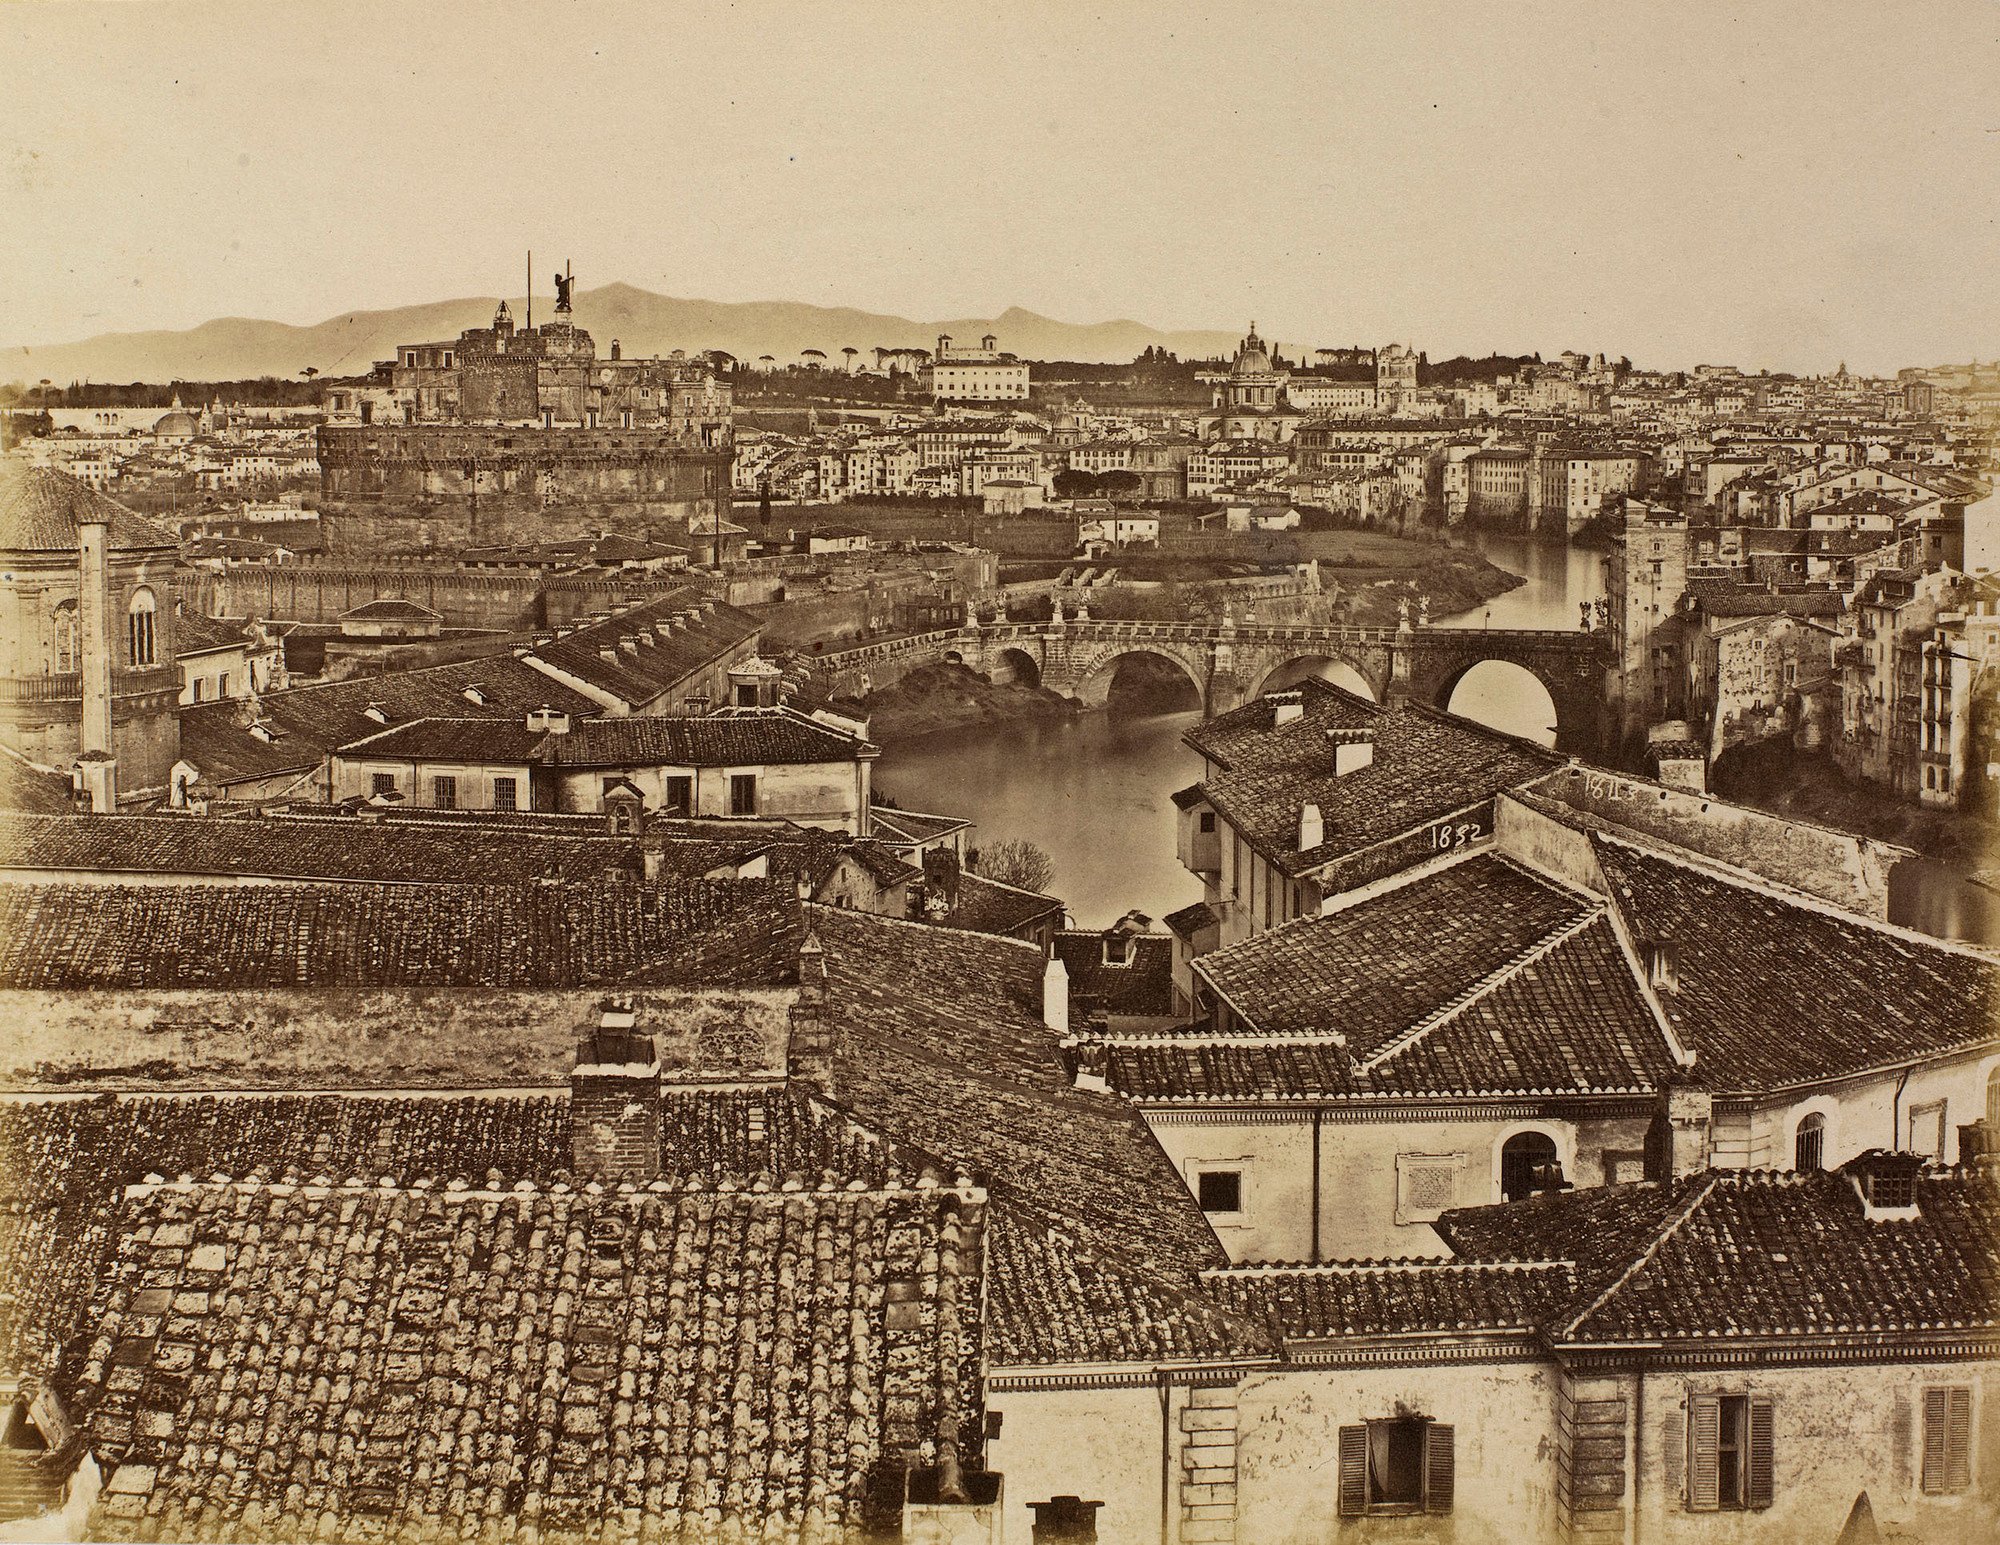 Photograph of a view of Rome with the bridge of St Angelo spanning the river Tiber in the middle distance and the Sabine Hills in the far distance. Roof tops of buildings dominate the foreground.